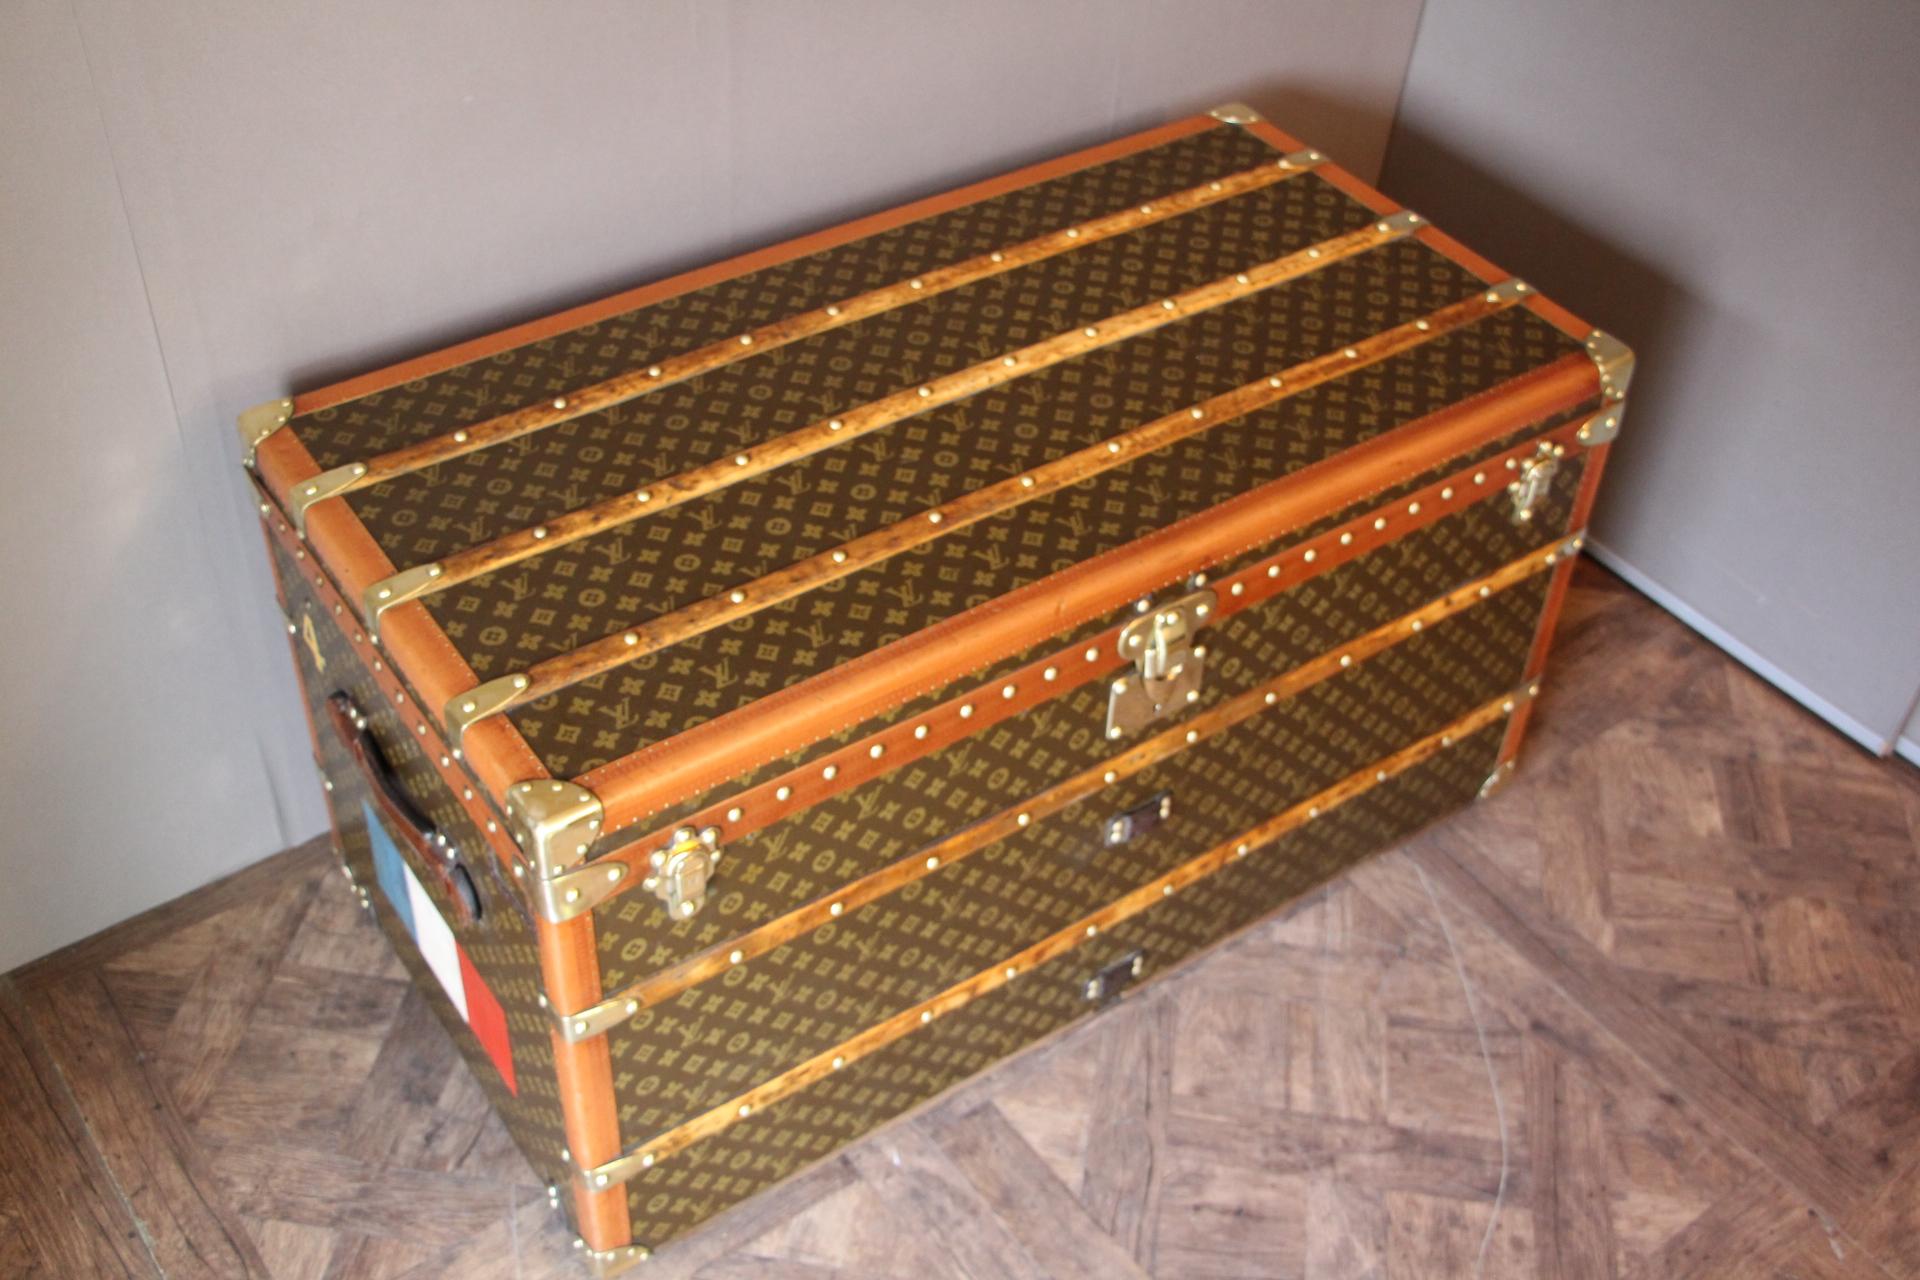 This beautiful Louis Vuitton trunk is all stenciled LV monogram canvas, with all Louis Vuitton stamped brass hardware and lozine trim. It features large leather side handles as well as a customized French flag on each side. It has got a very warm